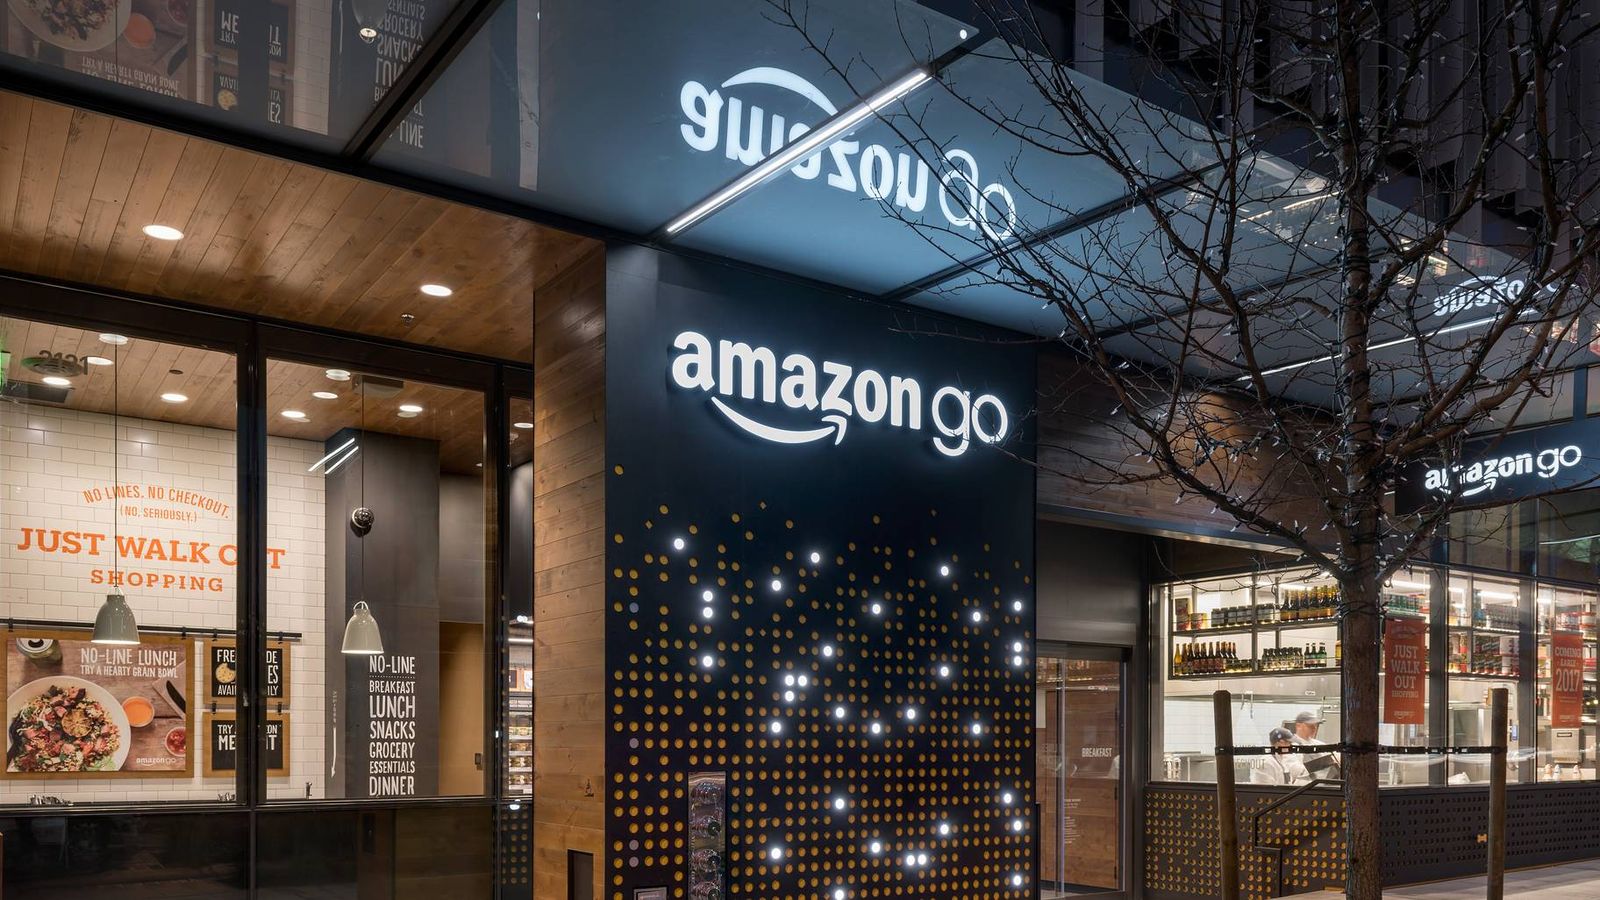 Why Amazon Go is being called the next Big Job Killer